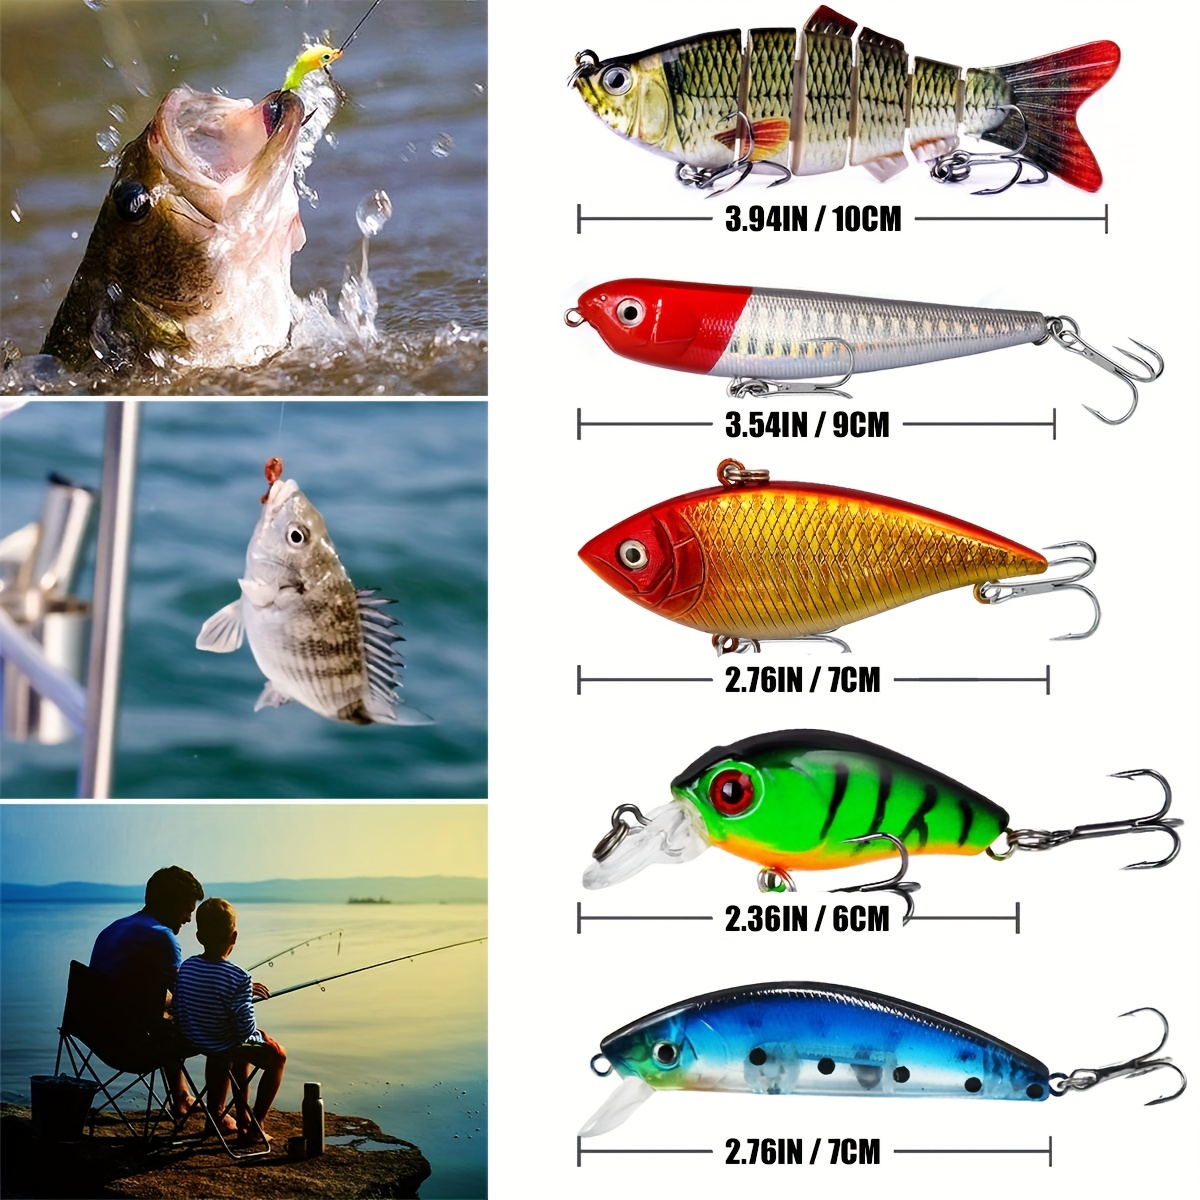 5 Pieces Spinnerbait Fishing Lures Bass Fishing Jigs Lure Kits